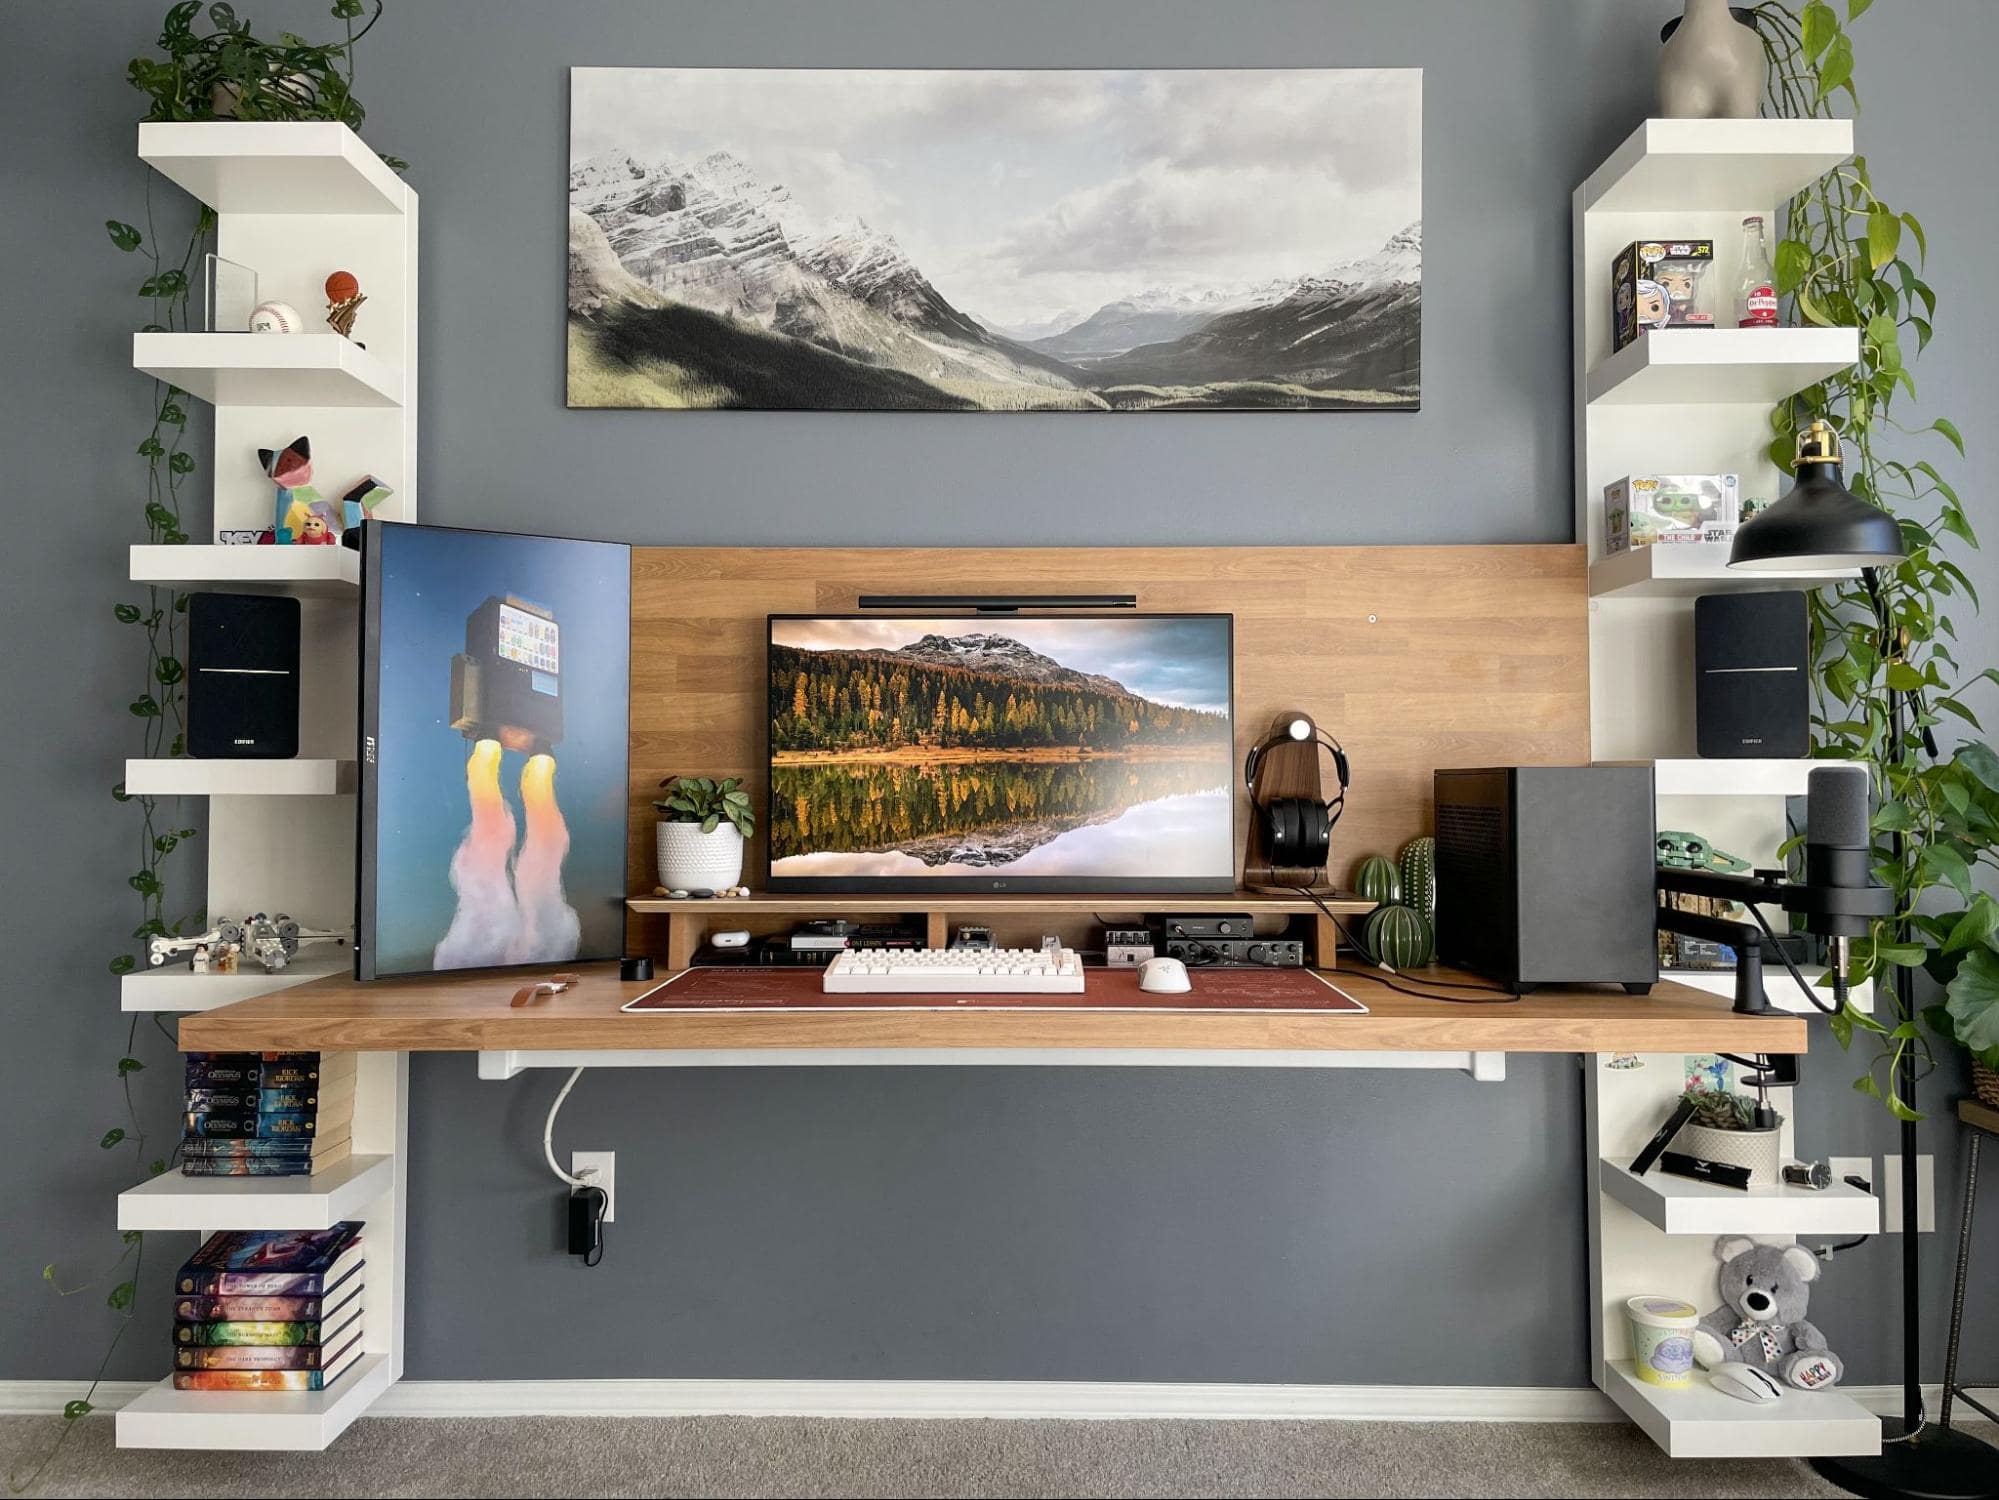 A modern home office setup with a floating desk flanked by white shelves filled with books and decor, two monitors, and framed artwork against a grey wall, complemented by indoor plants